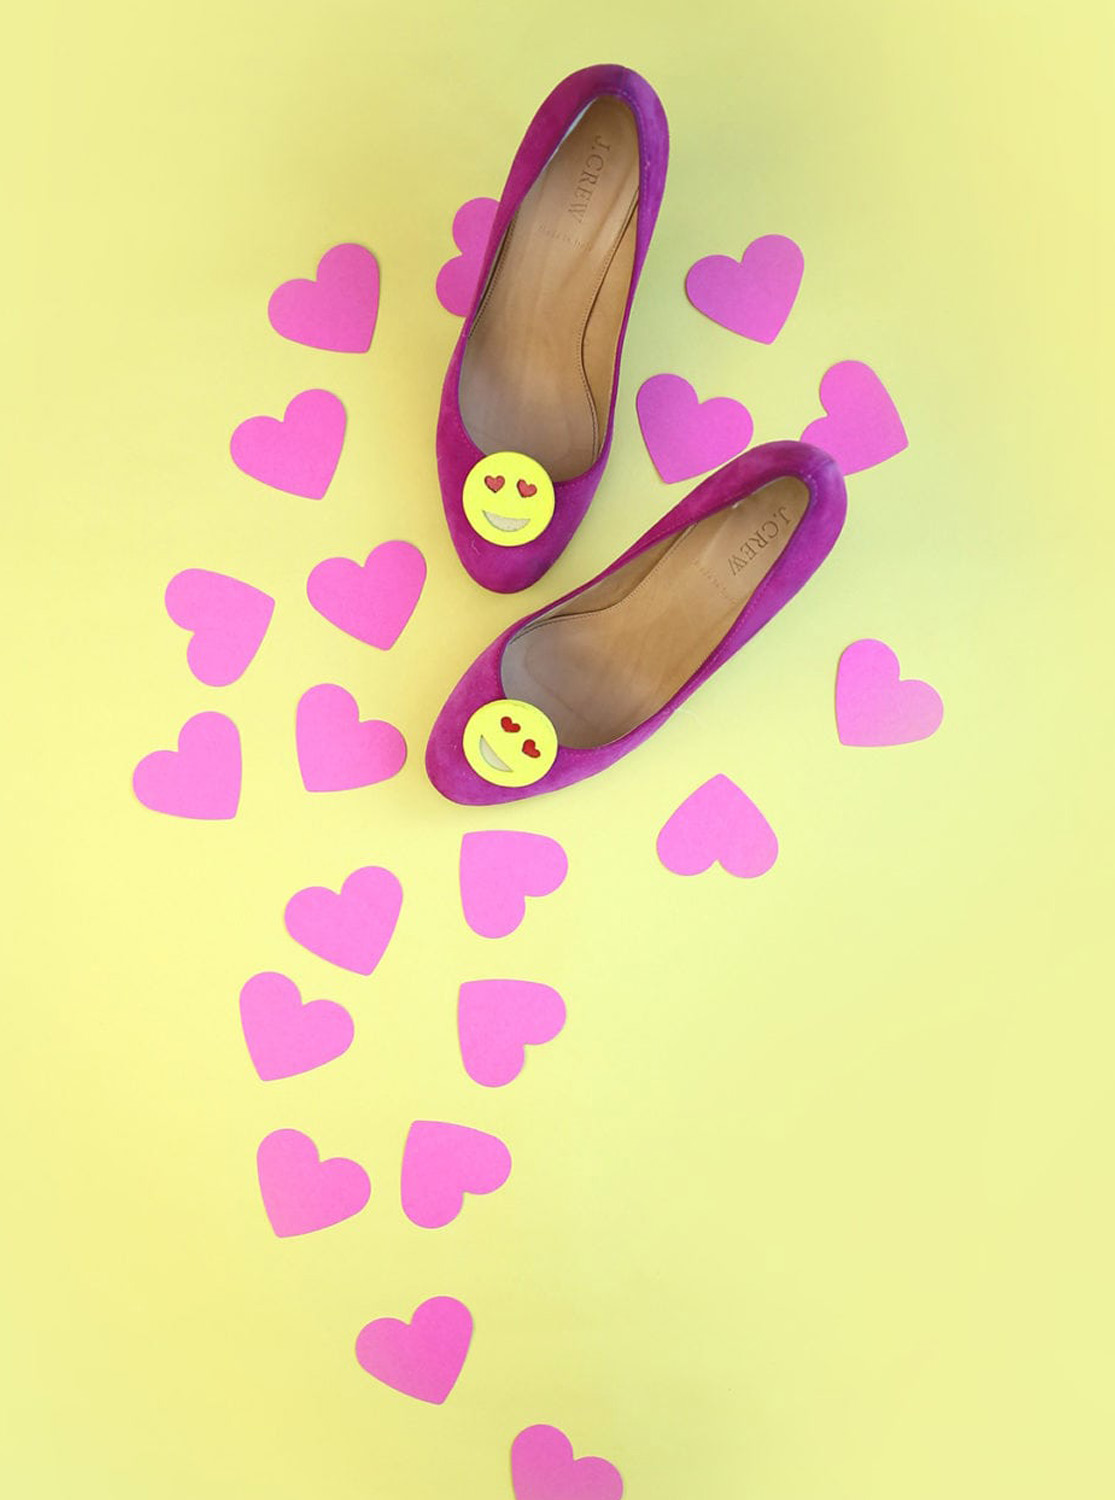 Heart Emoji Slippers The Perfect Way to Add Some Love to Your Step